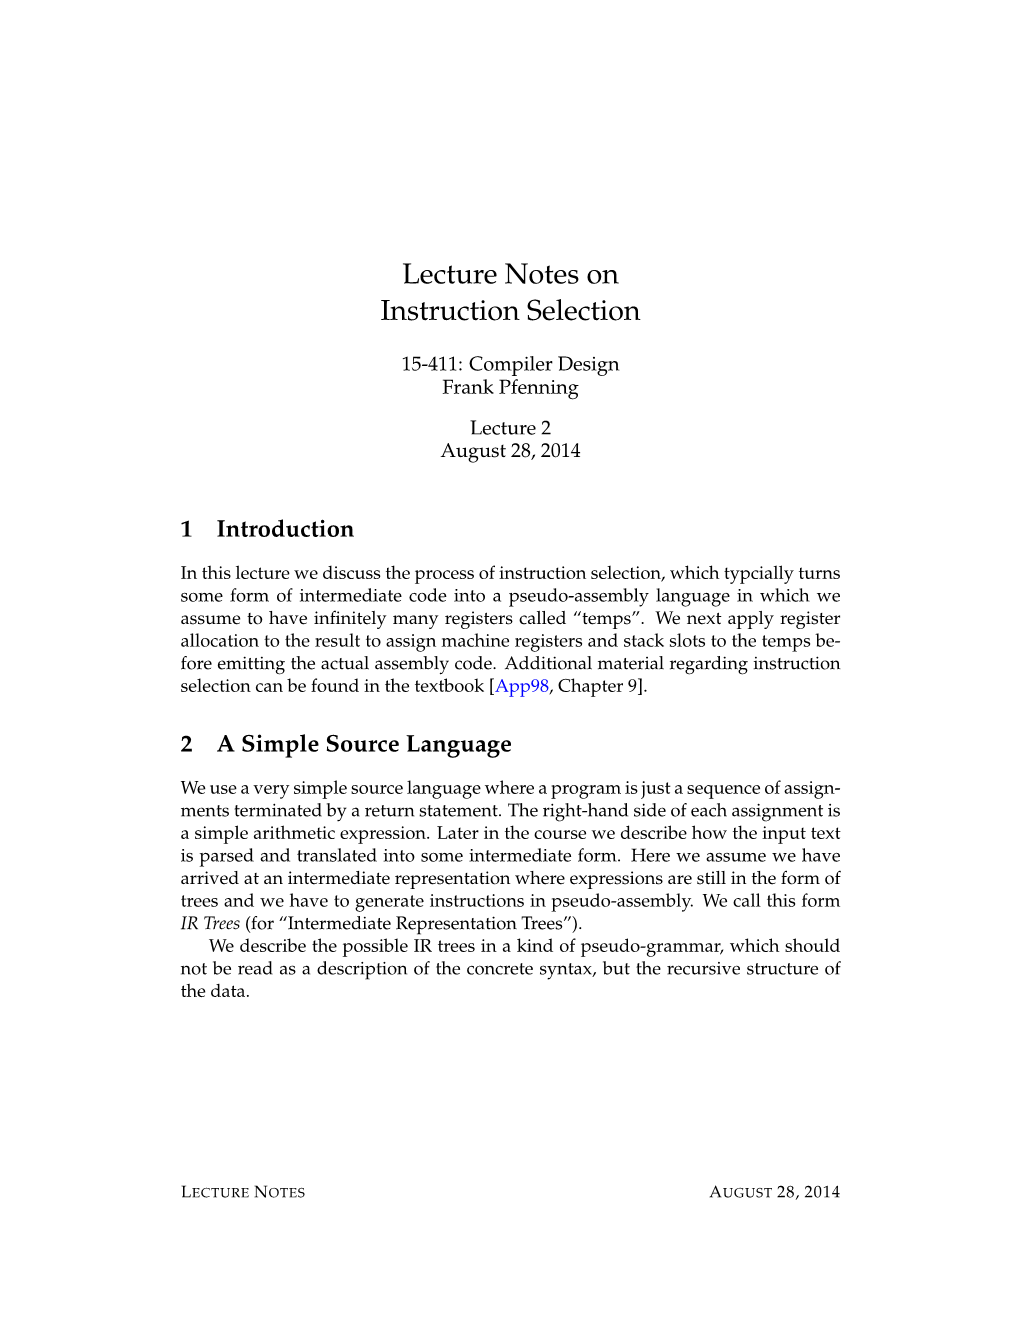 Lecture Notes on Instruction Selection